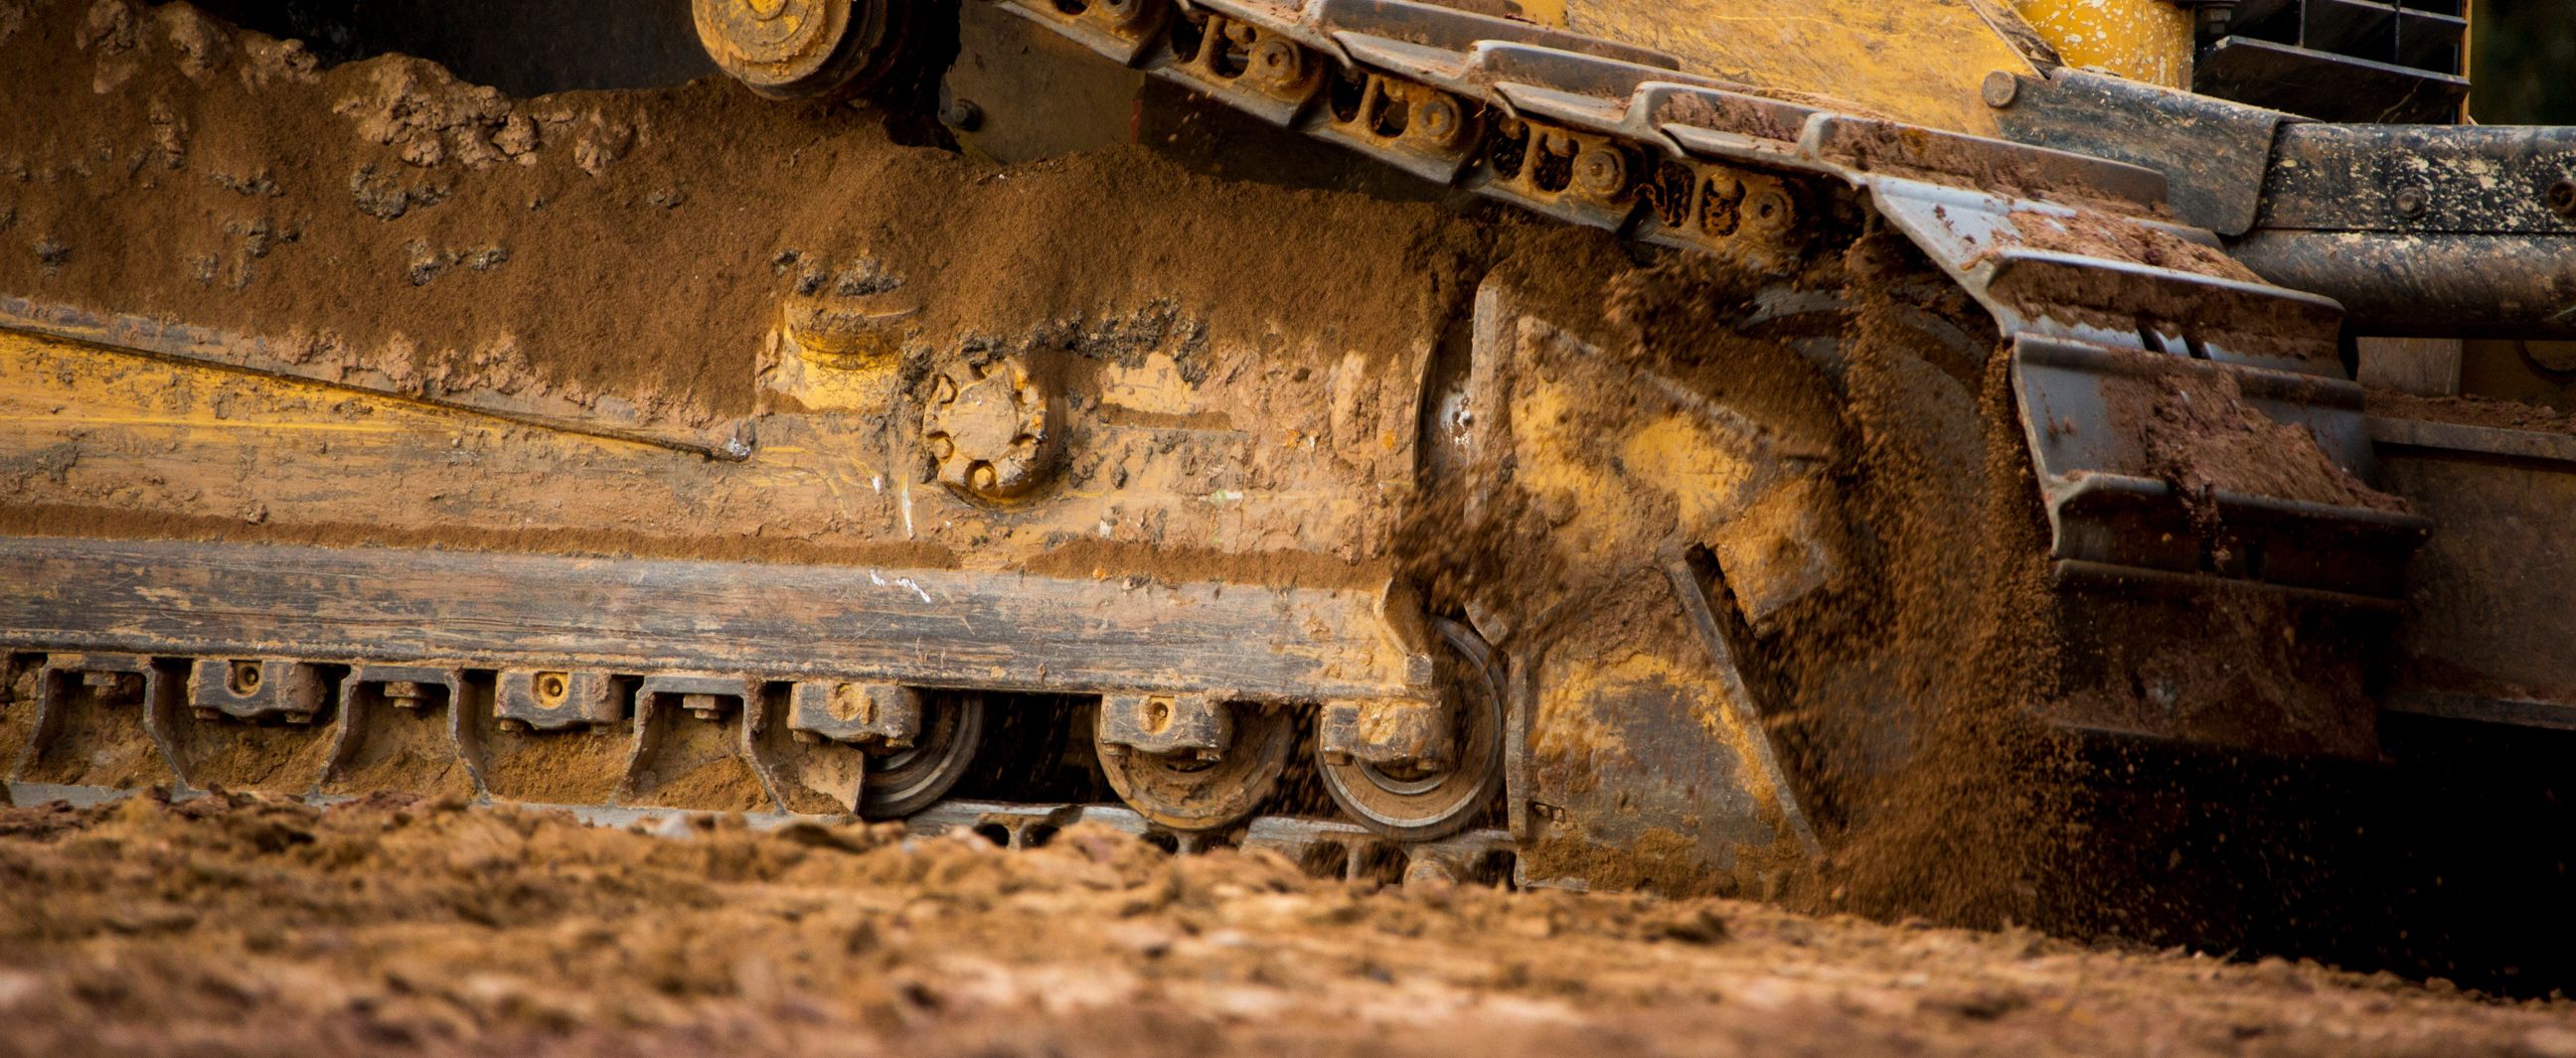 6 Tips for Getting Your Heavy Equipment Unstuck from Mud